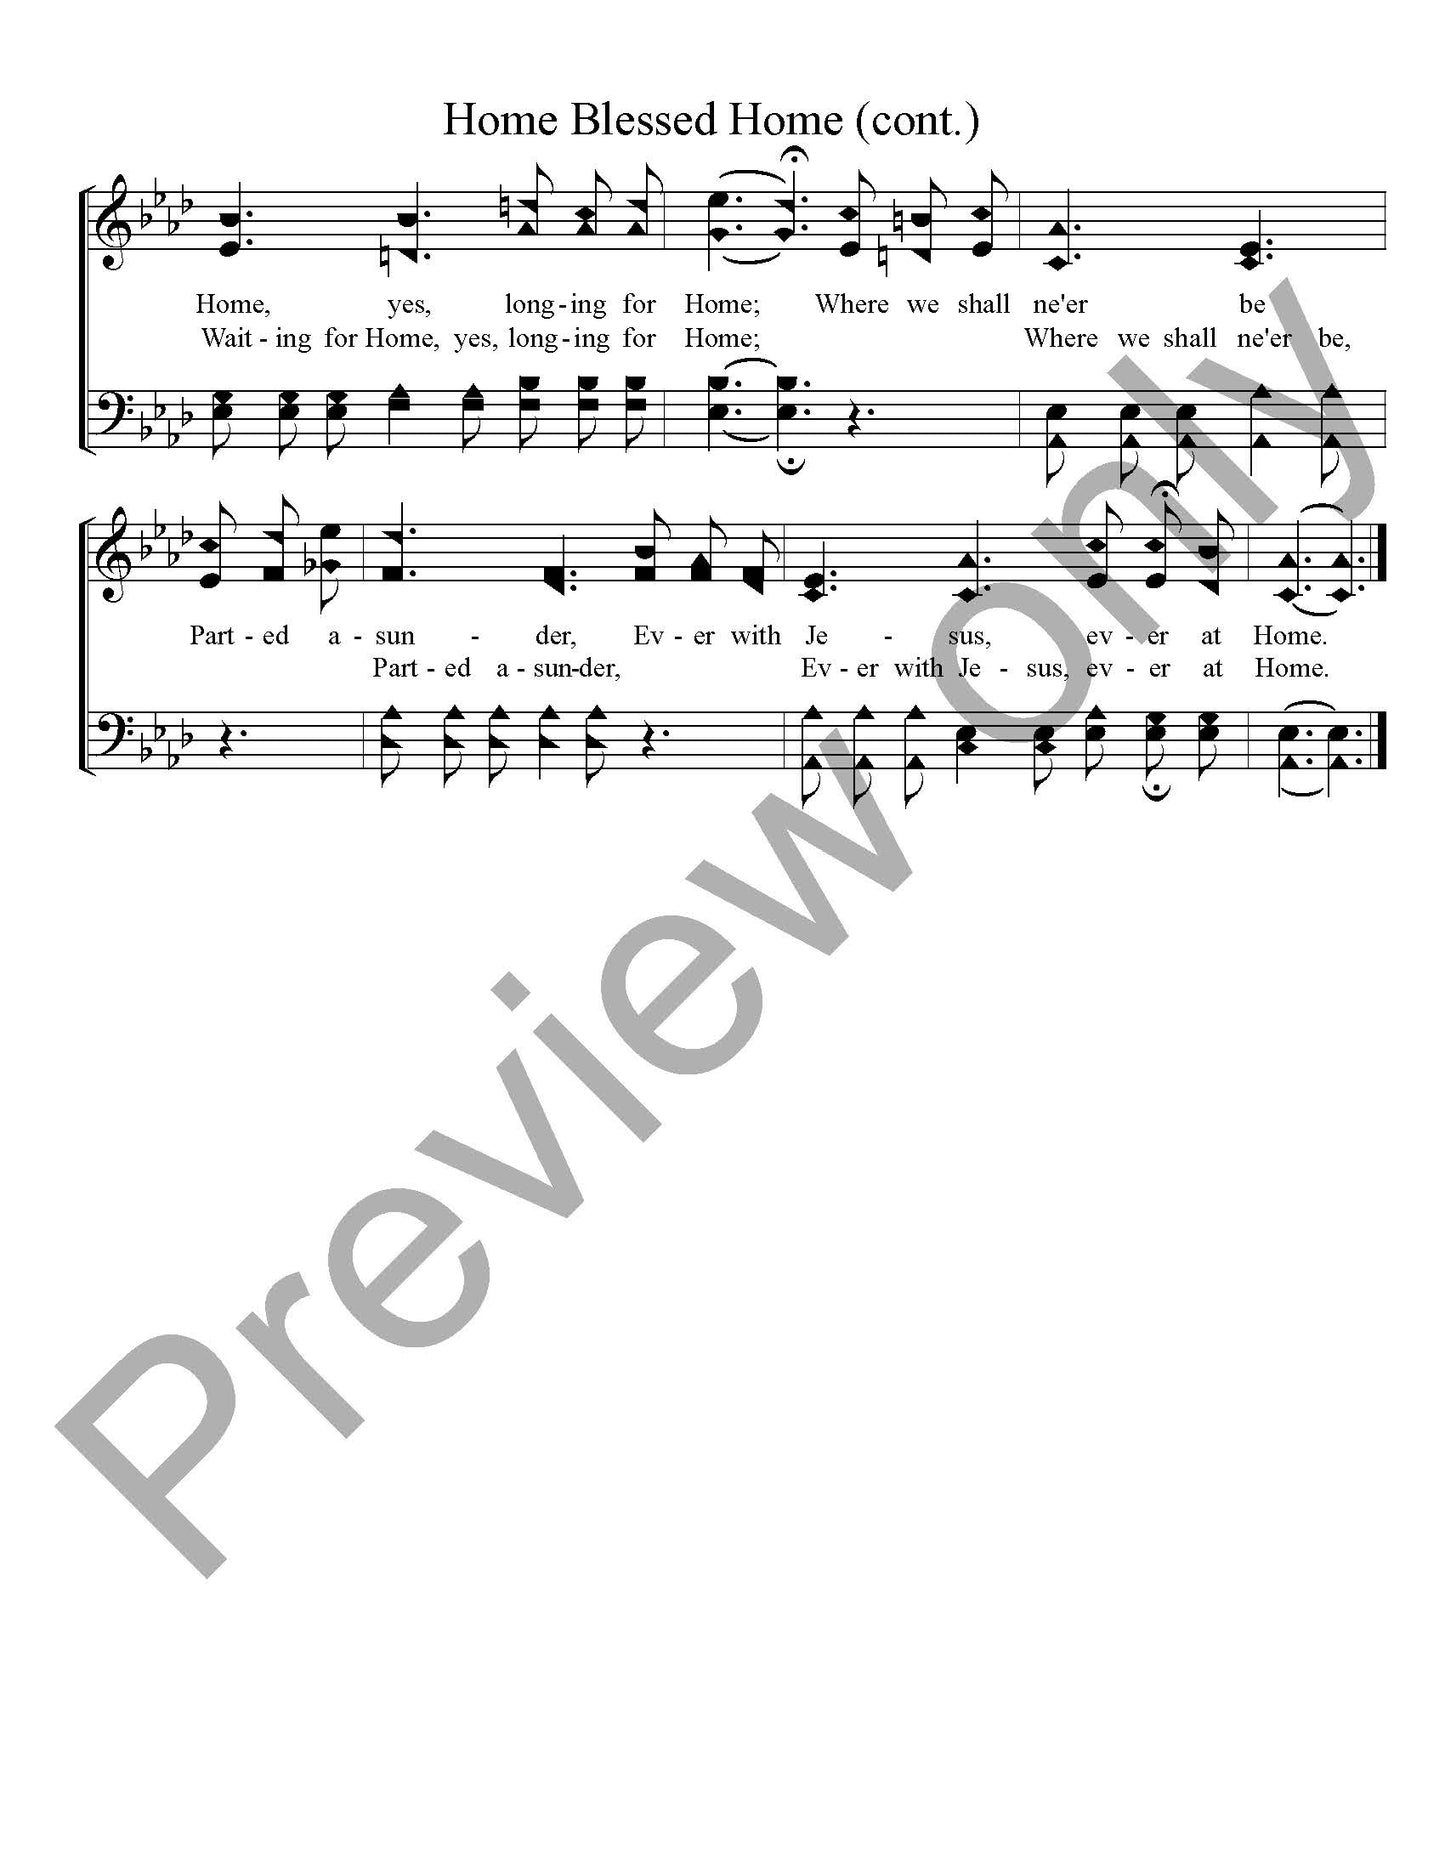 Home Blessed Home (SATB)